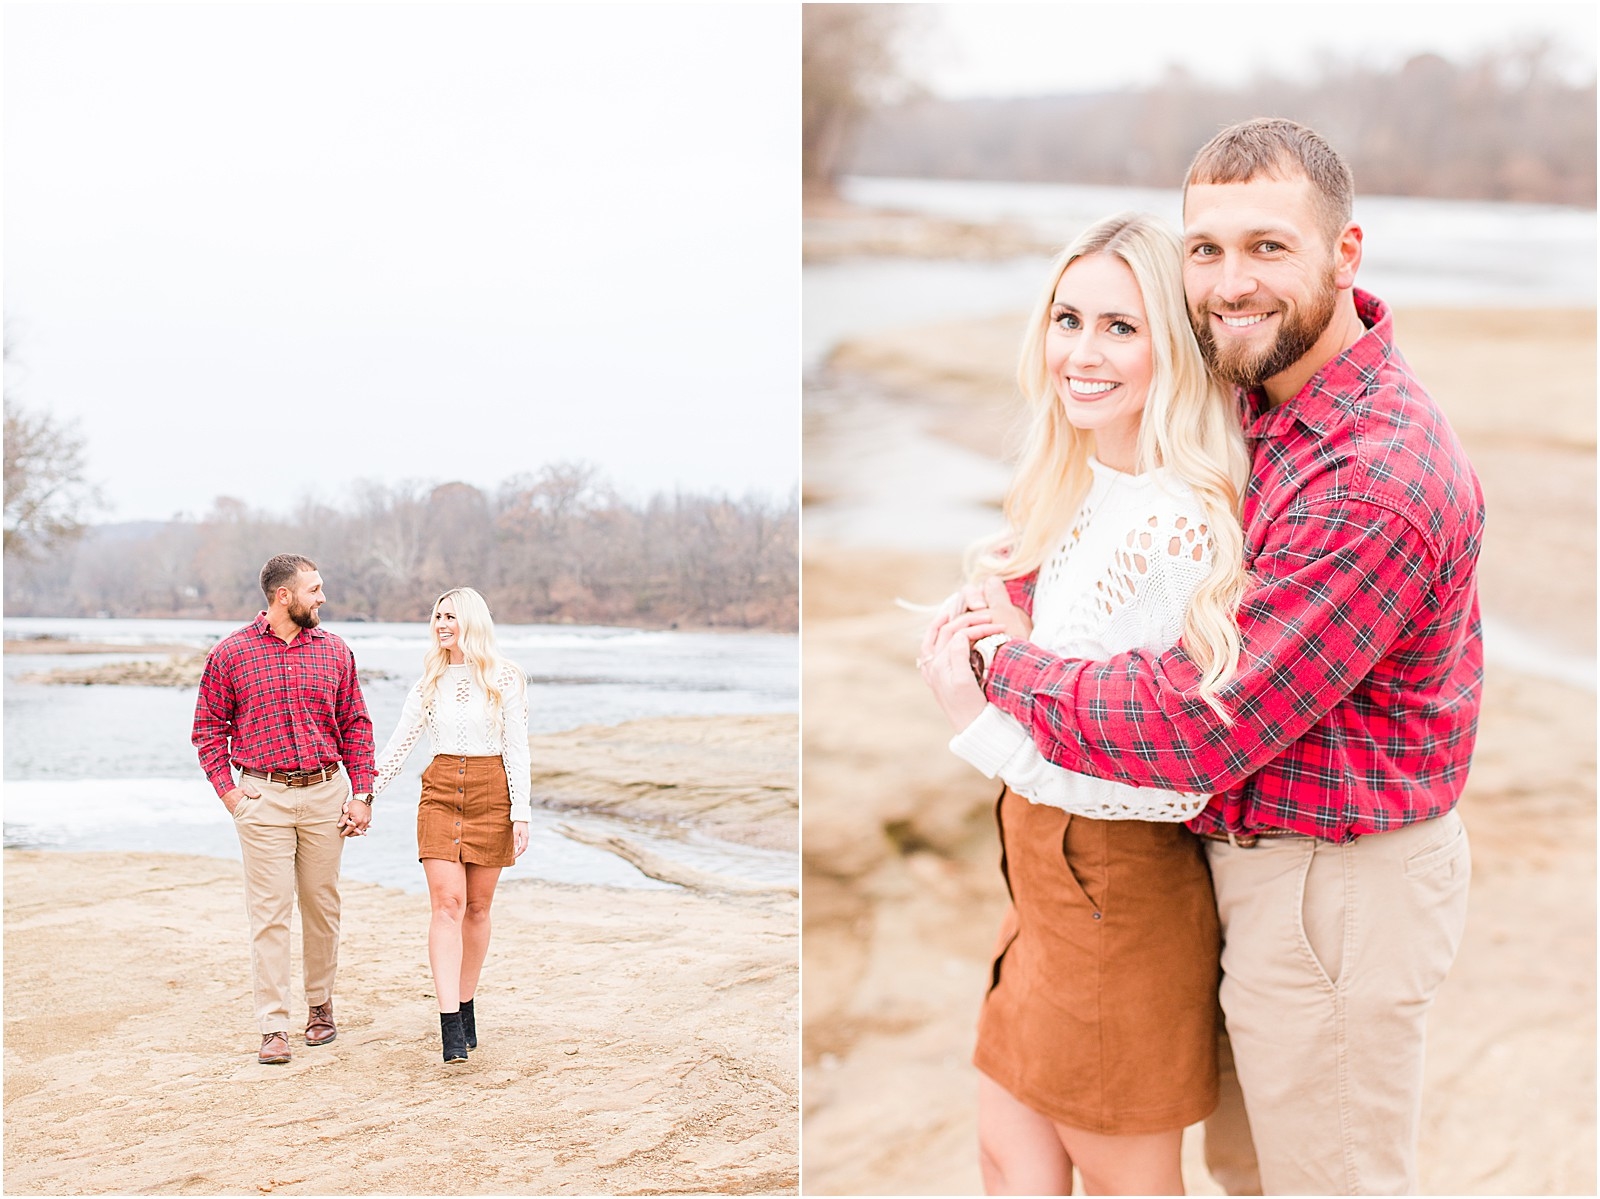 An sweet and snuggly fall anniversary session in Loogootee, Indiana. | #anniversarysession #fallsession #southernindianawedding | 005.jpg